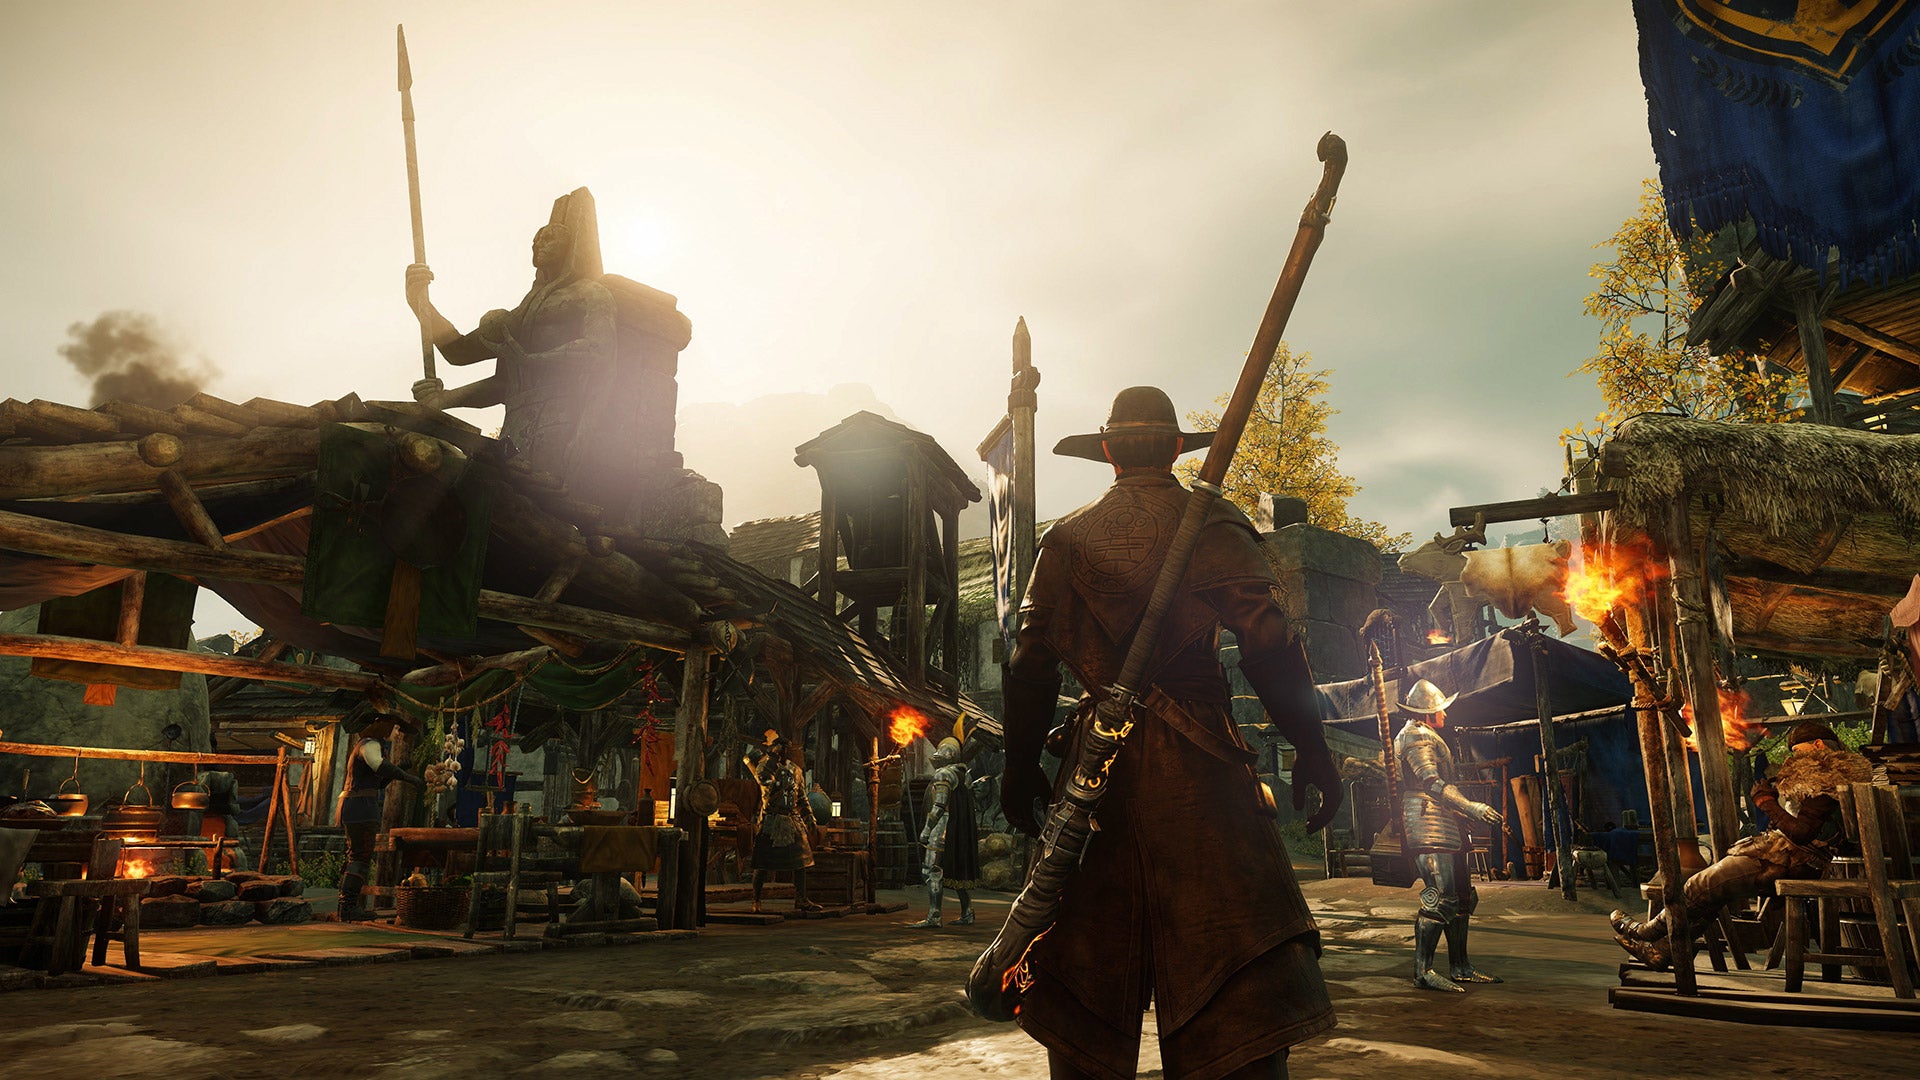 New World: A character in leather armor and a broad-brimmed hat stands silhouetted against a bright sky, looking over the crafter's alley in a town.